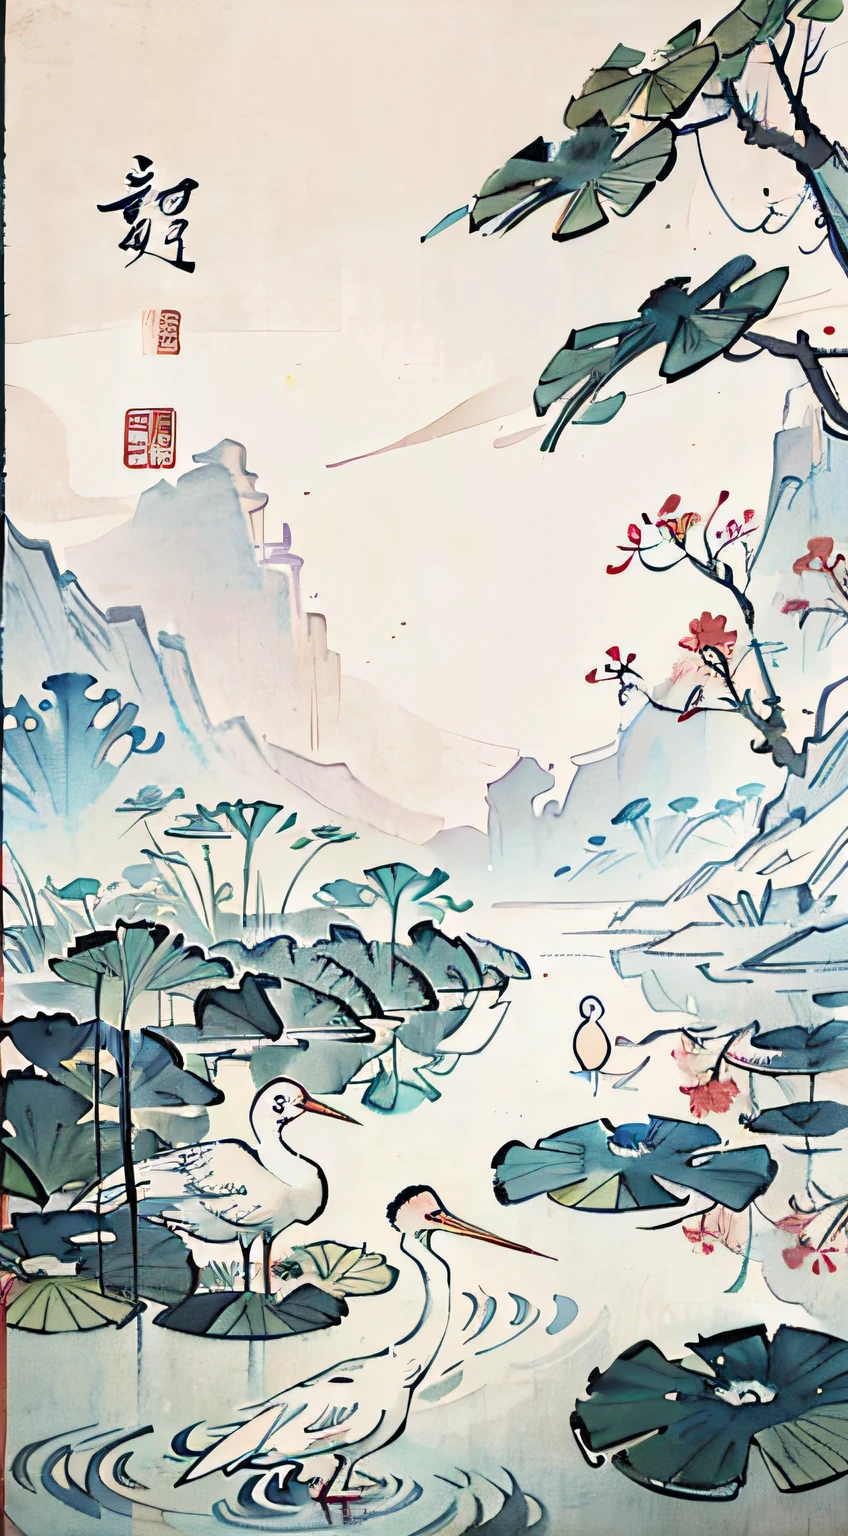 White crane painting in lotus pond, Chinese brush illustration, Chinese painting style, Chinese traditional painting, Chinese traditional ink painting, Chinese style painting, Chinese watercolor style, Chinese ink painting, beautiful artwork illustration, inspired by Xiao Yuncong, Chinese traditional art, Chinese painting, Zhongyuan Festival, inspired by Wang Yuanqi